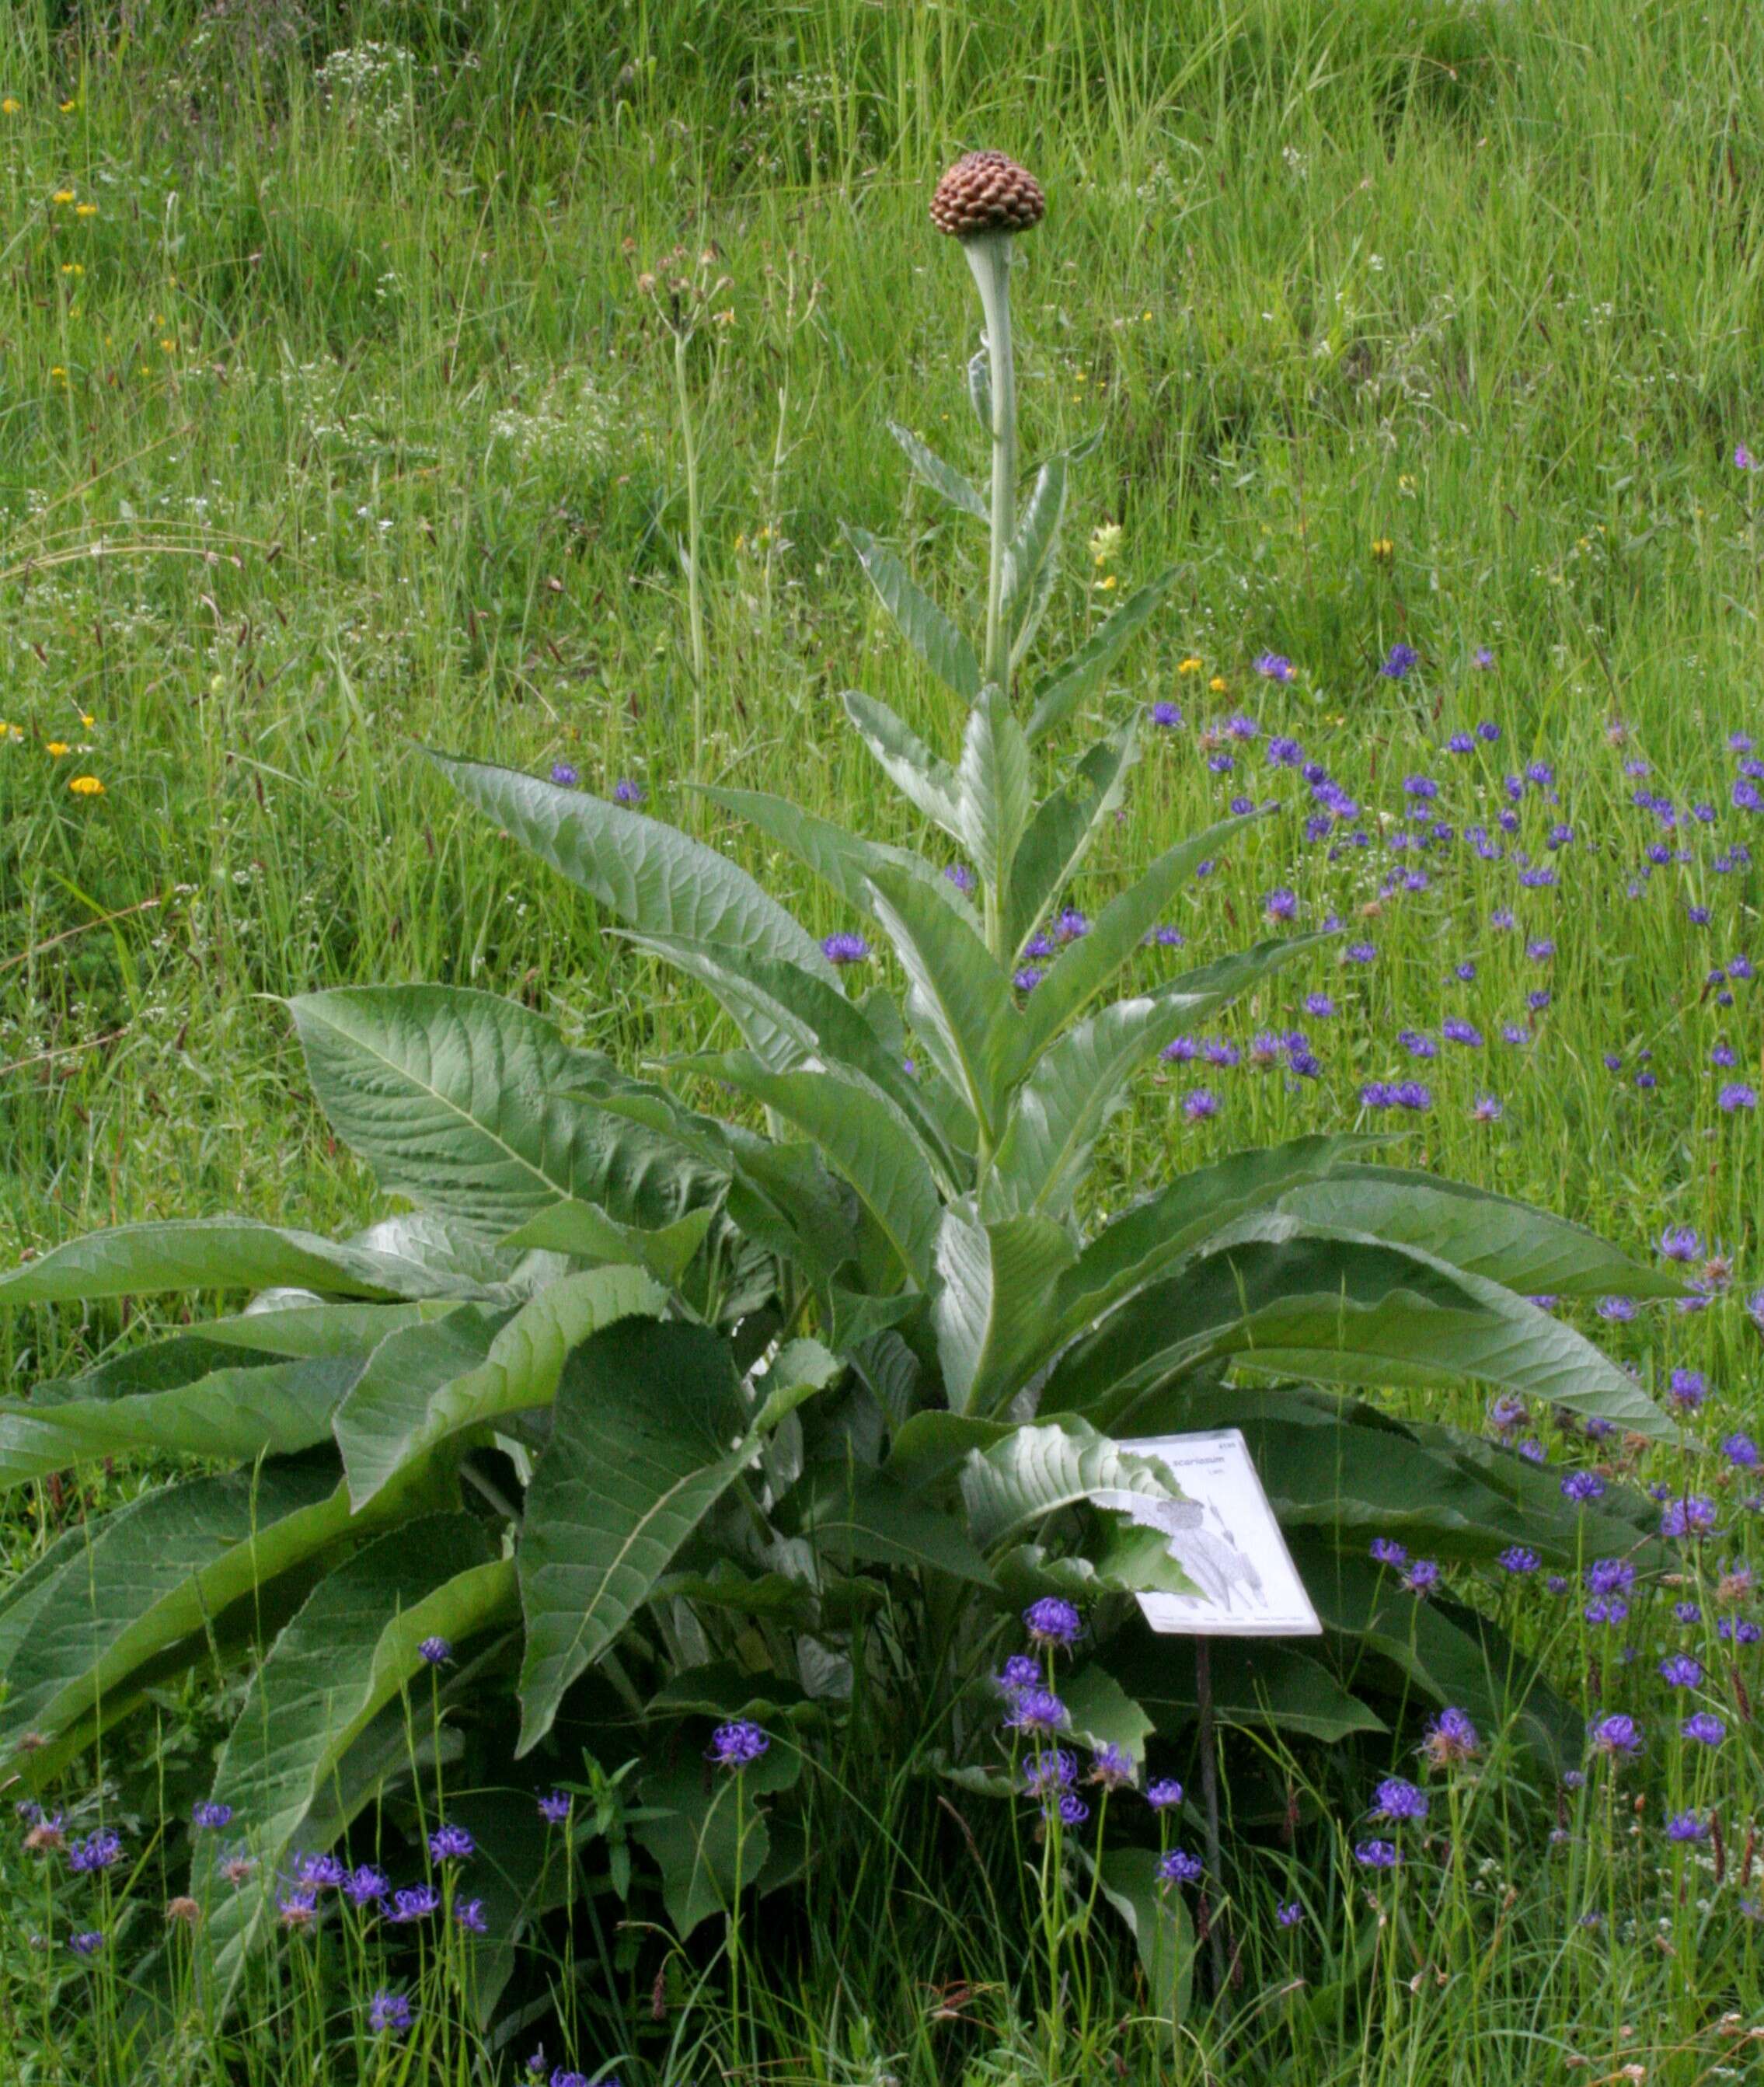 Image of Giant Scabiosa